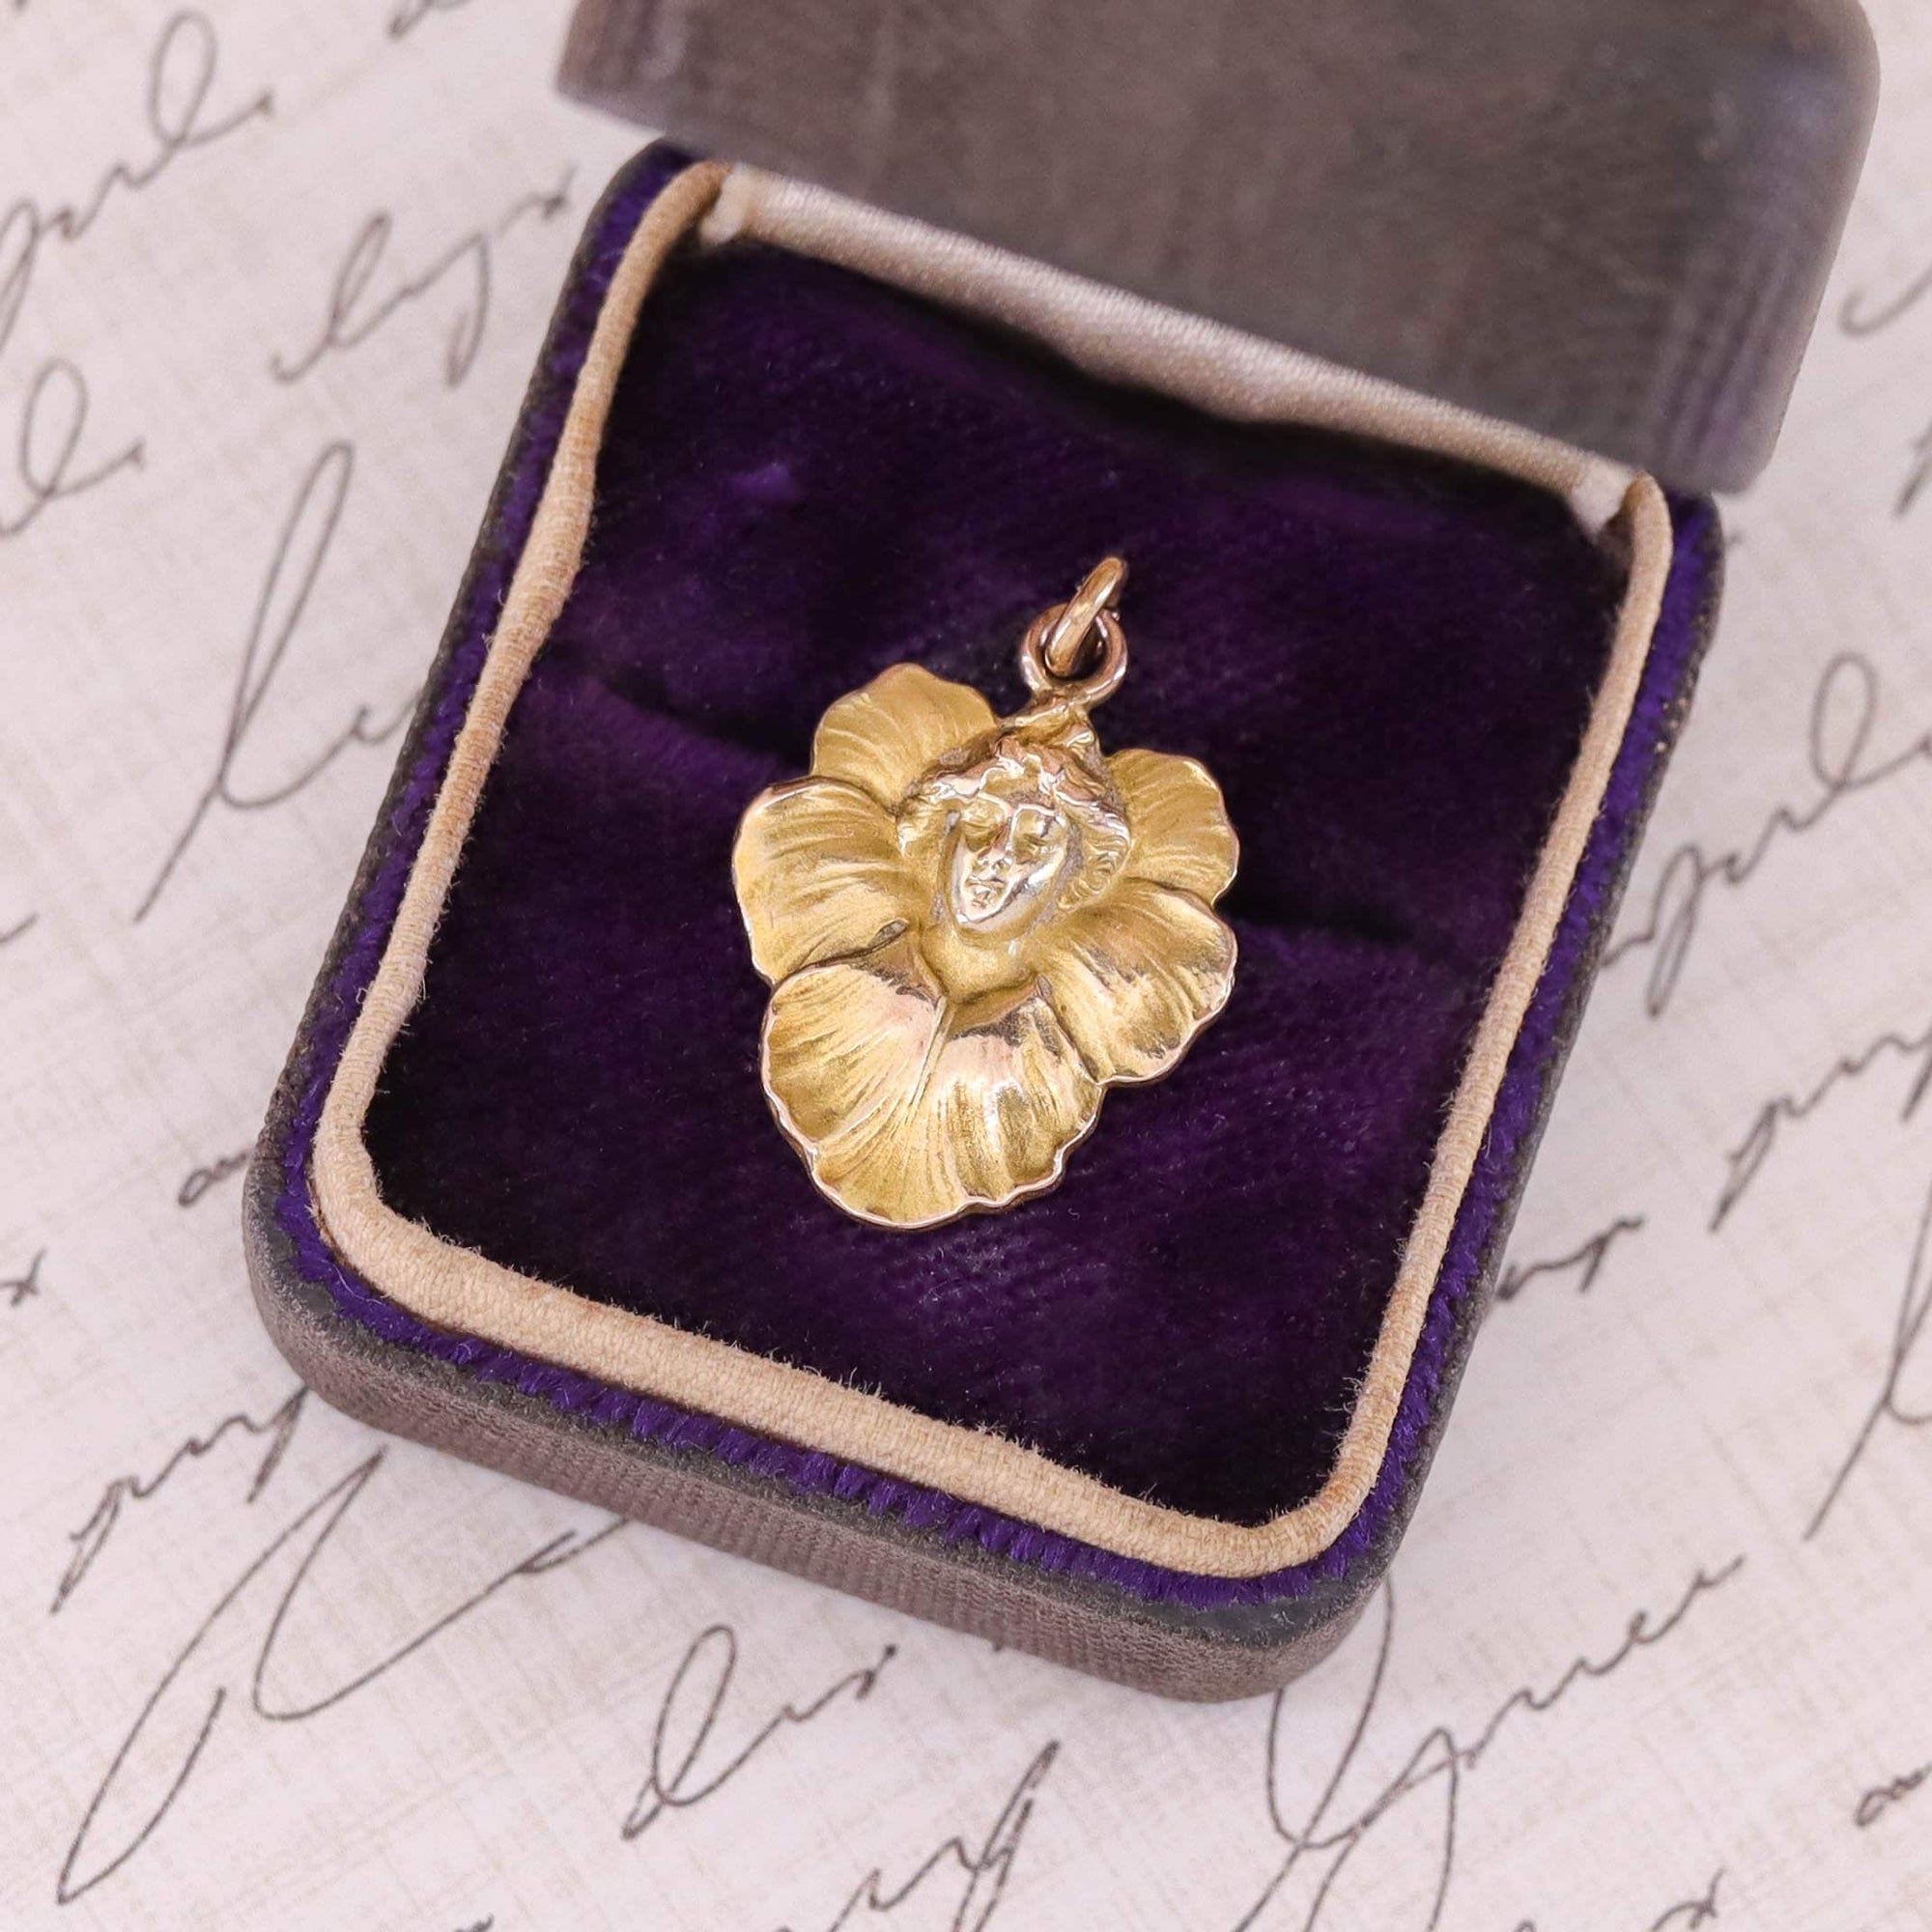 Antique Pansy Woman Charm of 10k Gold